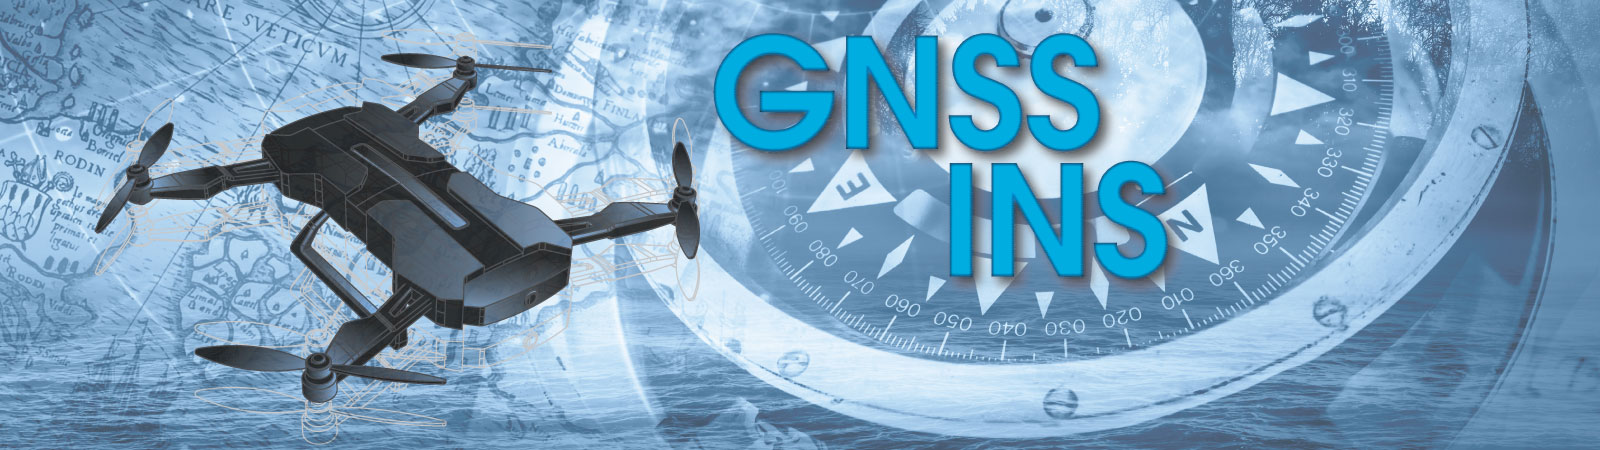 GNSS INS